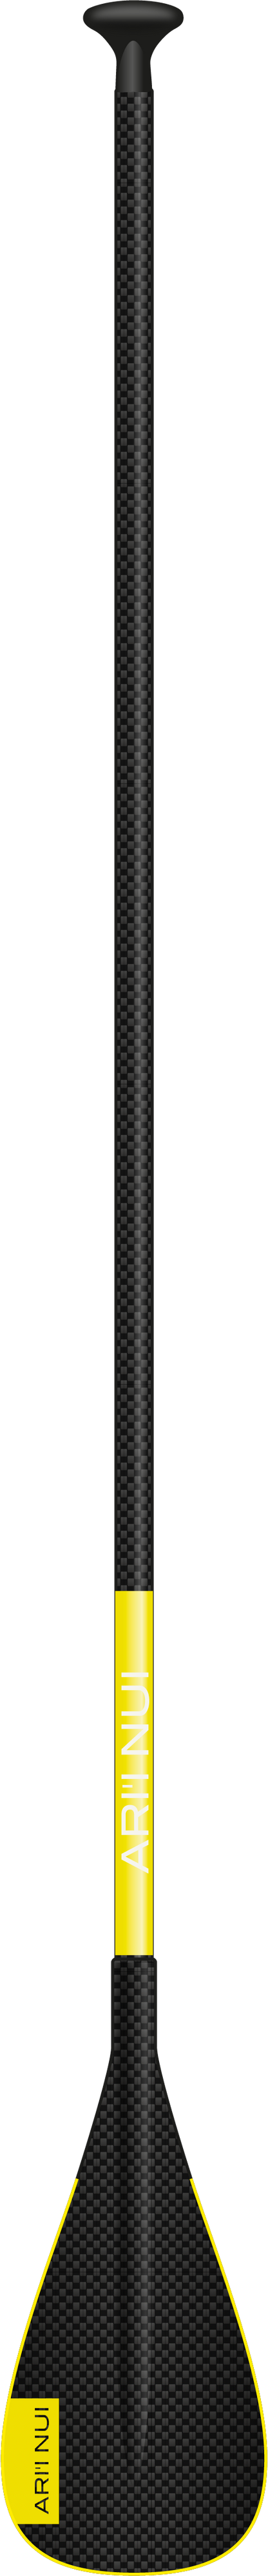 Full Carbon Paddle